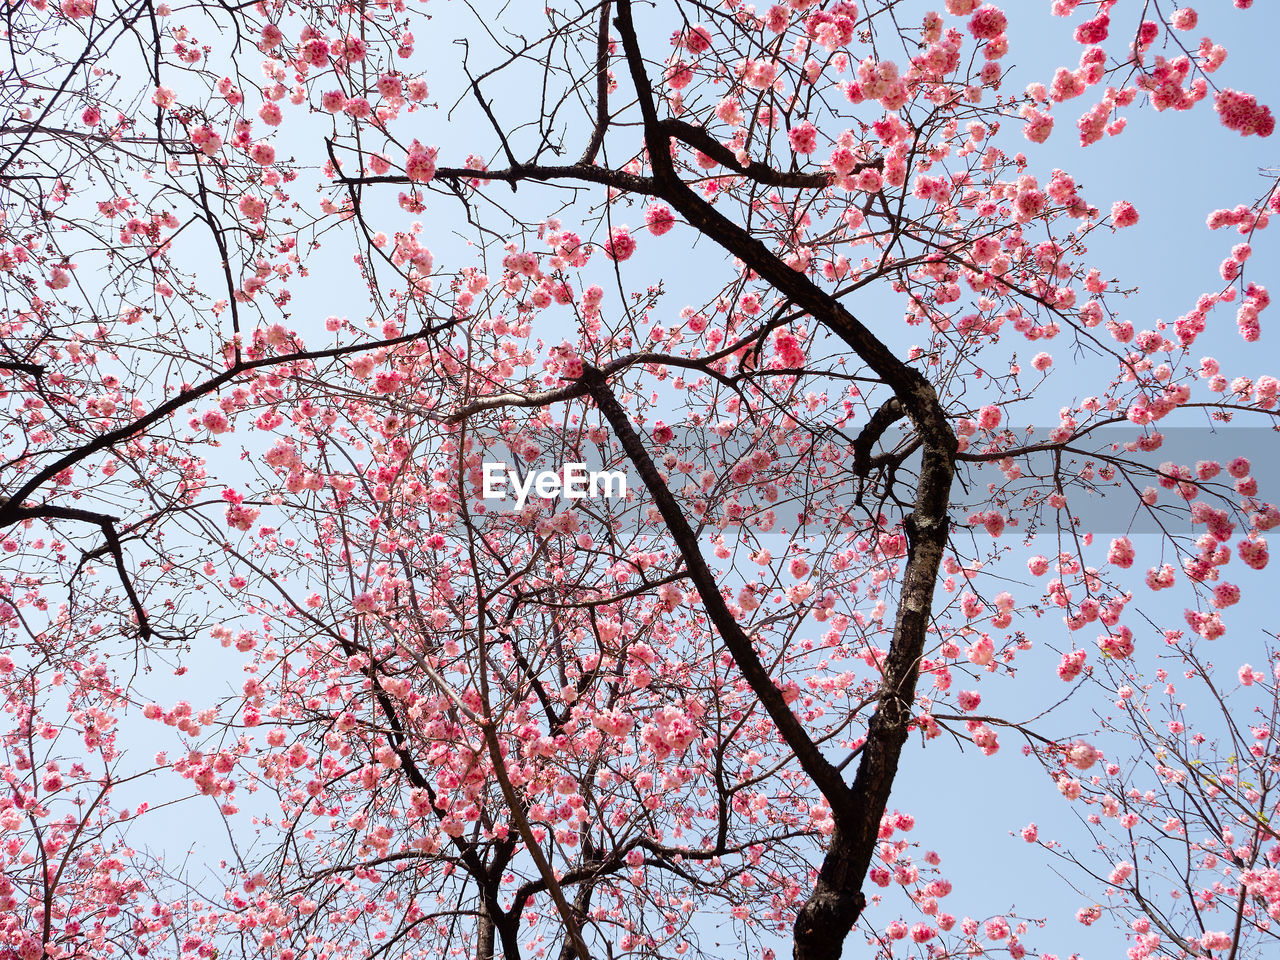 Low angle view of pink sakura on black branches blossoming under blue clear sky.